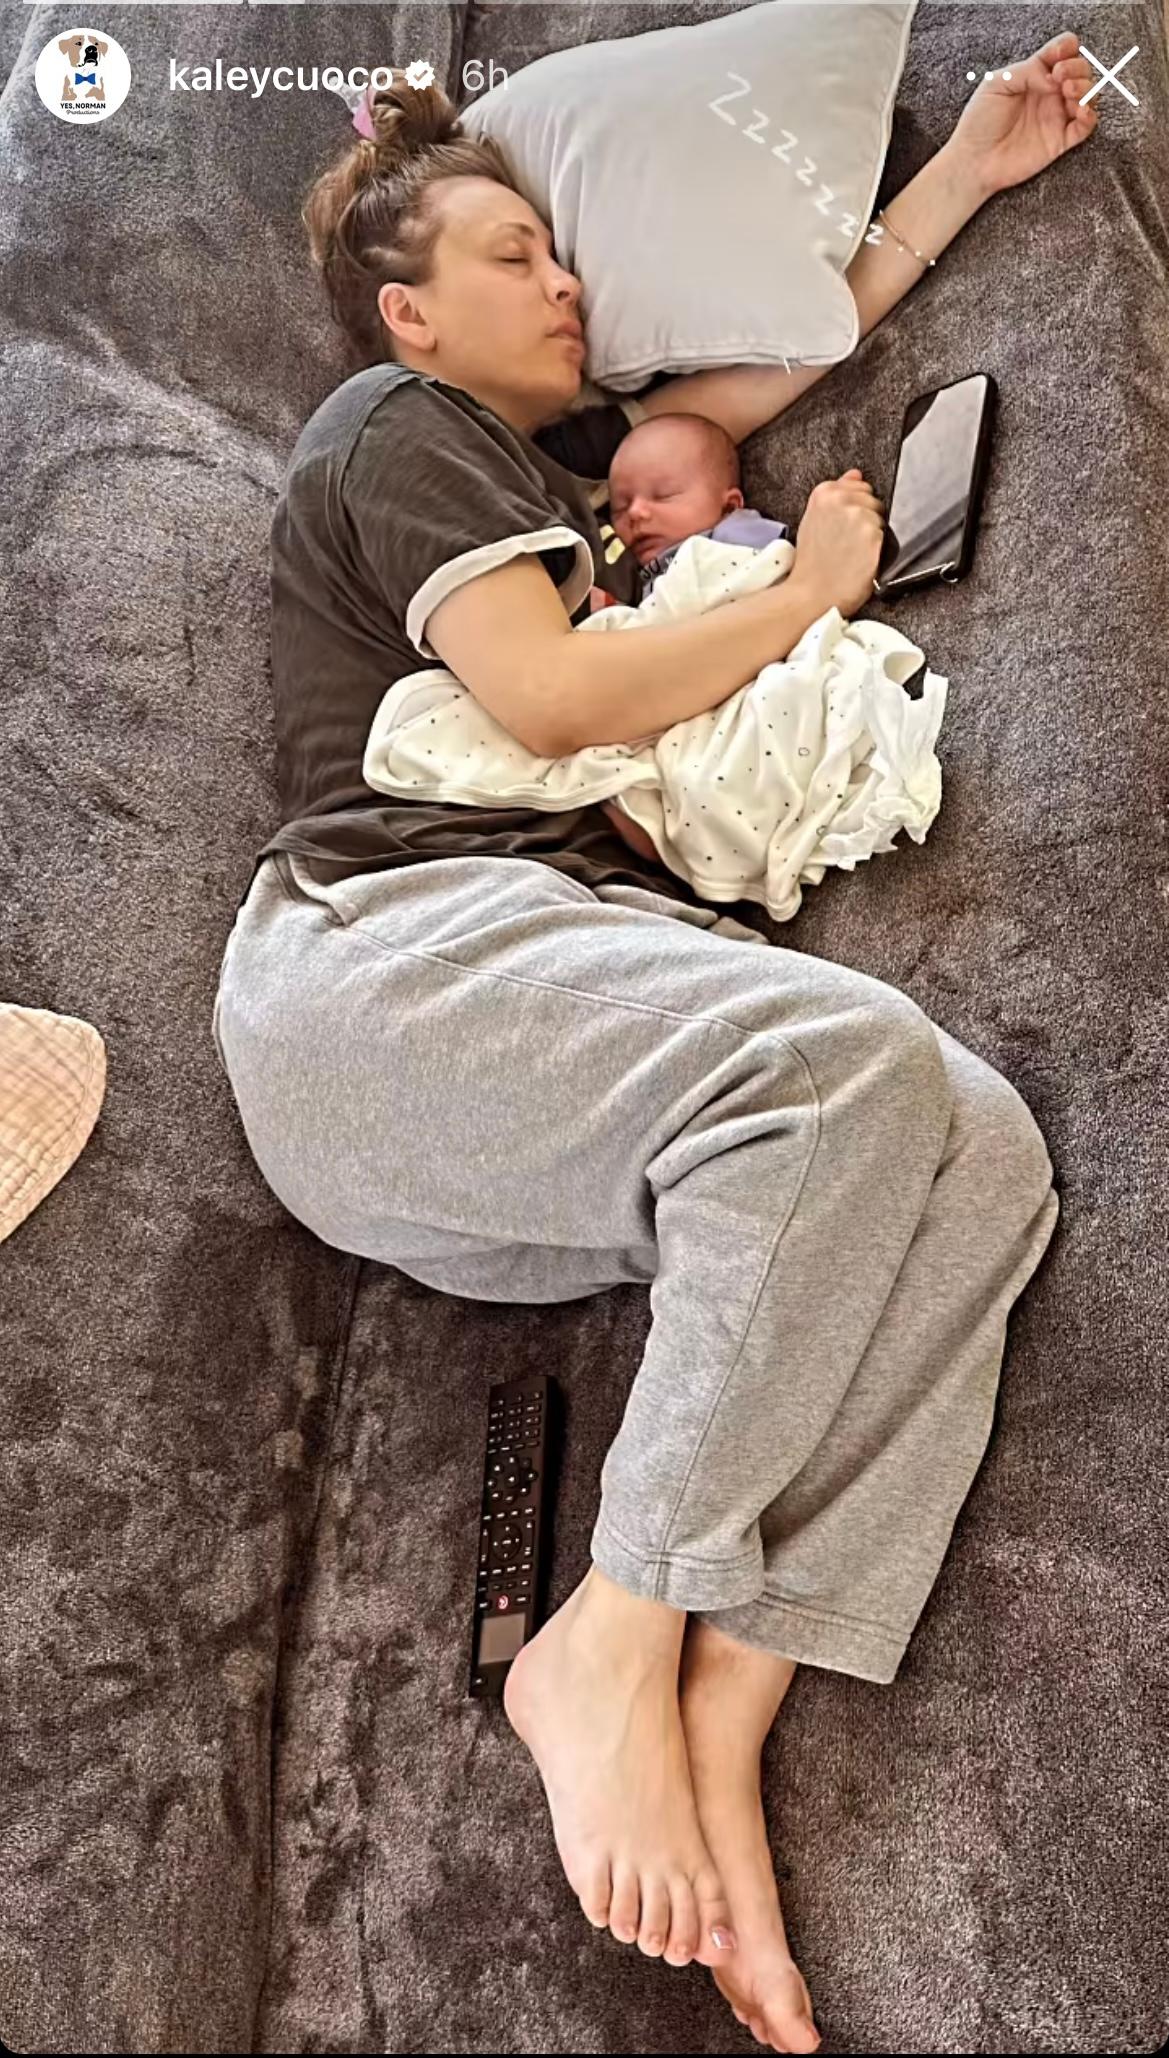 Kaley Cuoco cuddles daughter in new pics